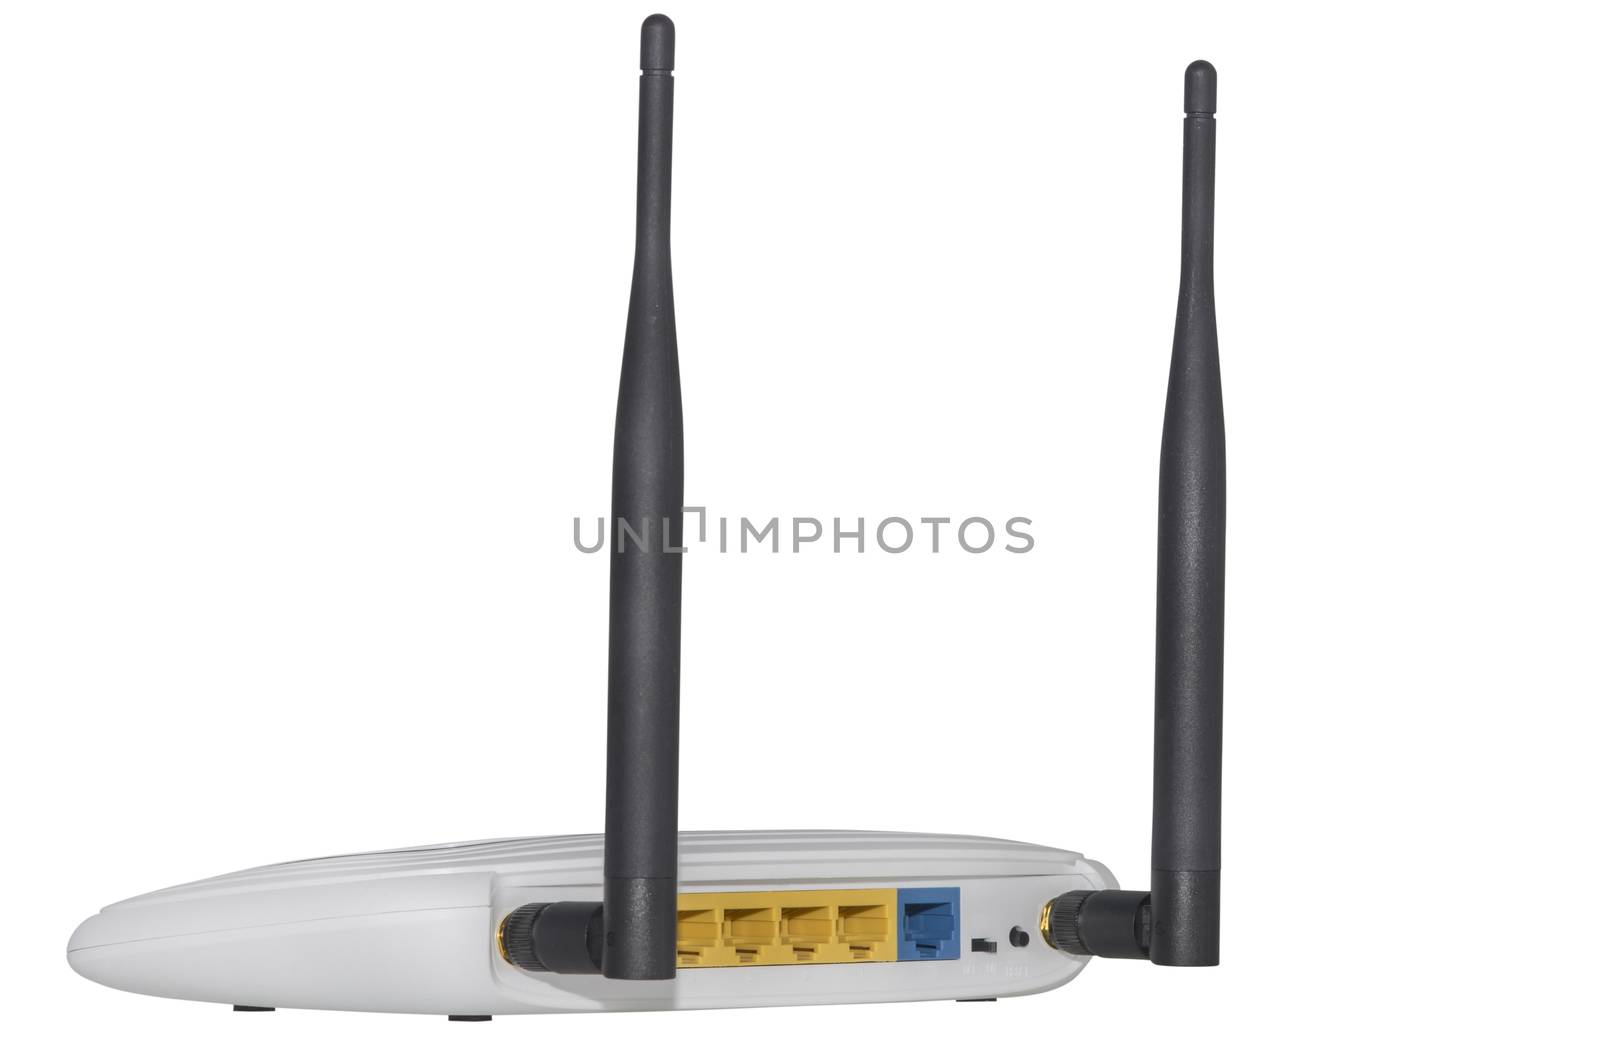 Wifi dual band gateway with antenna over white